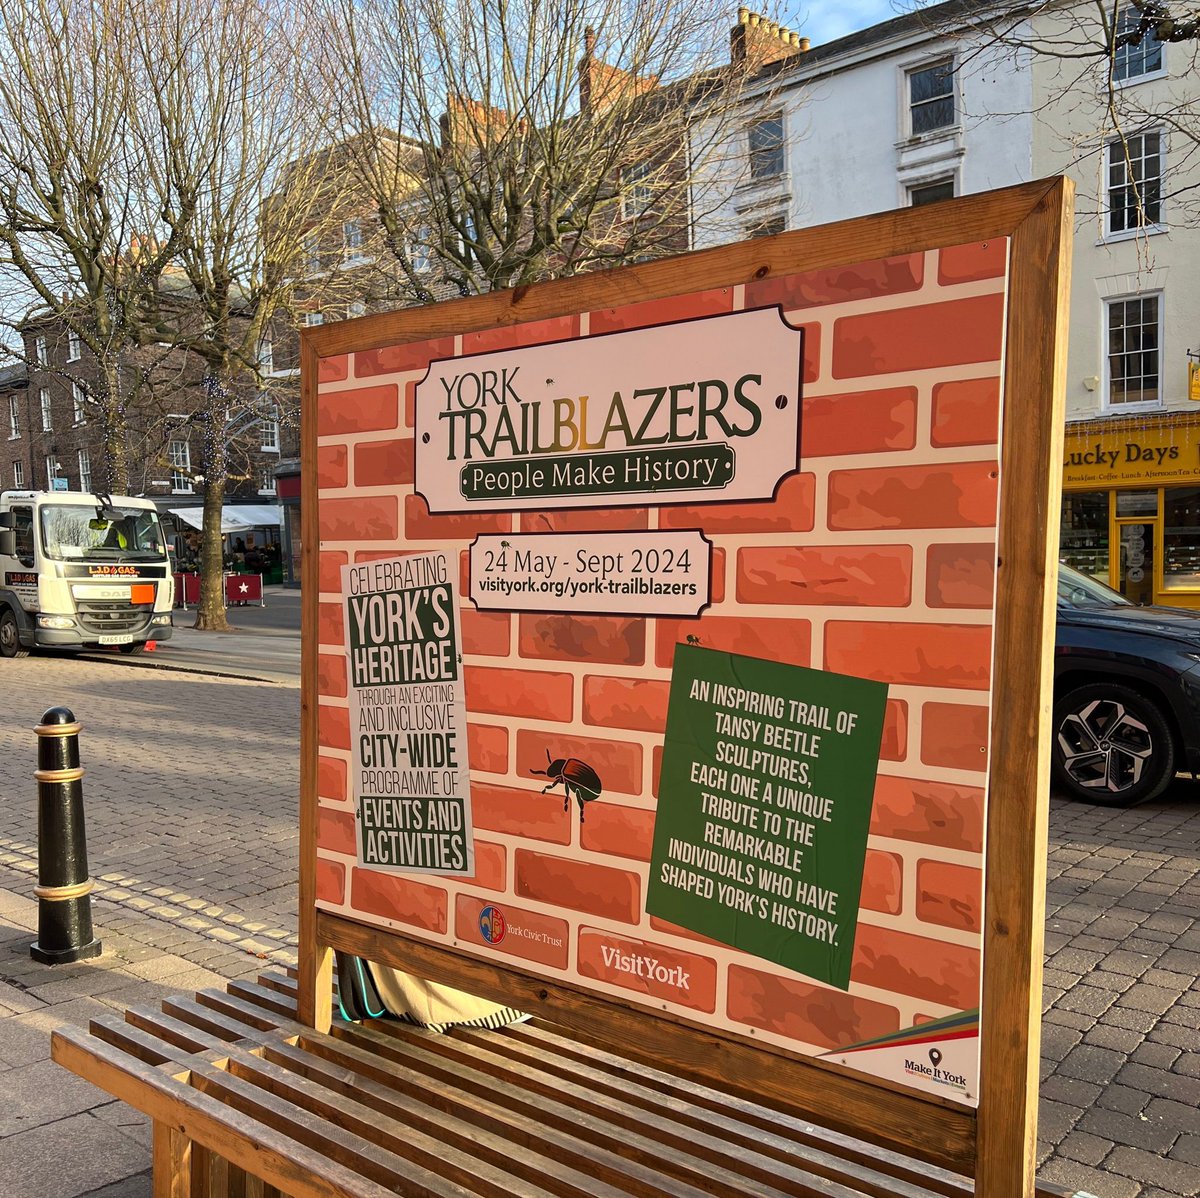 York Trailblazers is coming 🙌 Keep an eye out for exciting events coming up that celebrate York's Heritage 👀